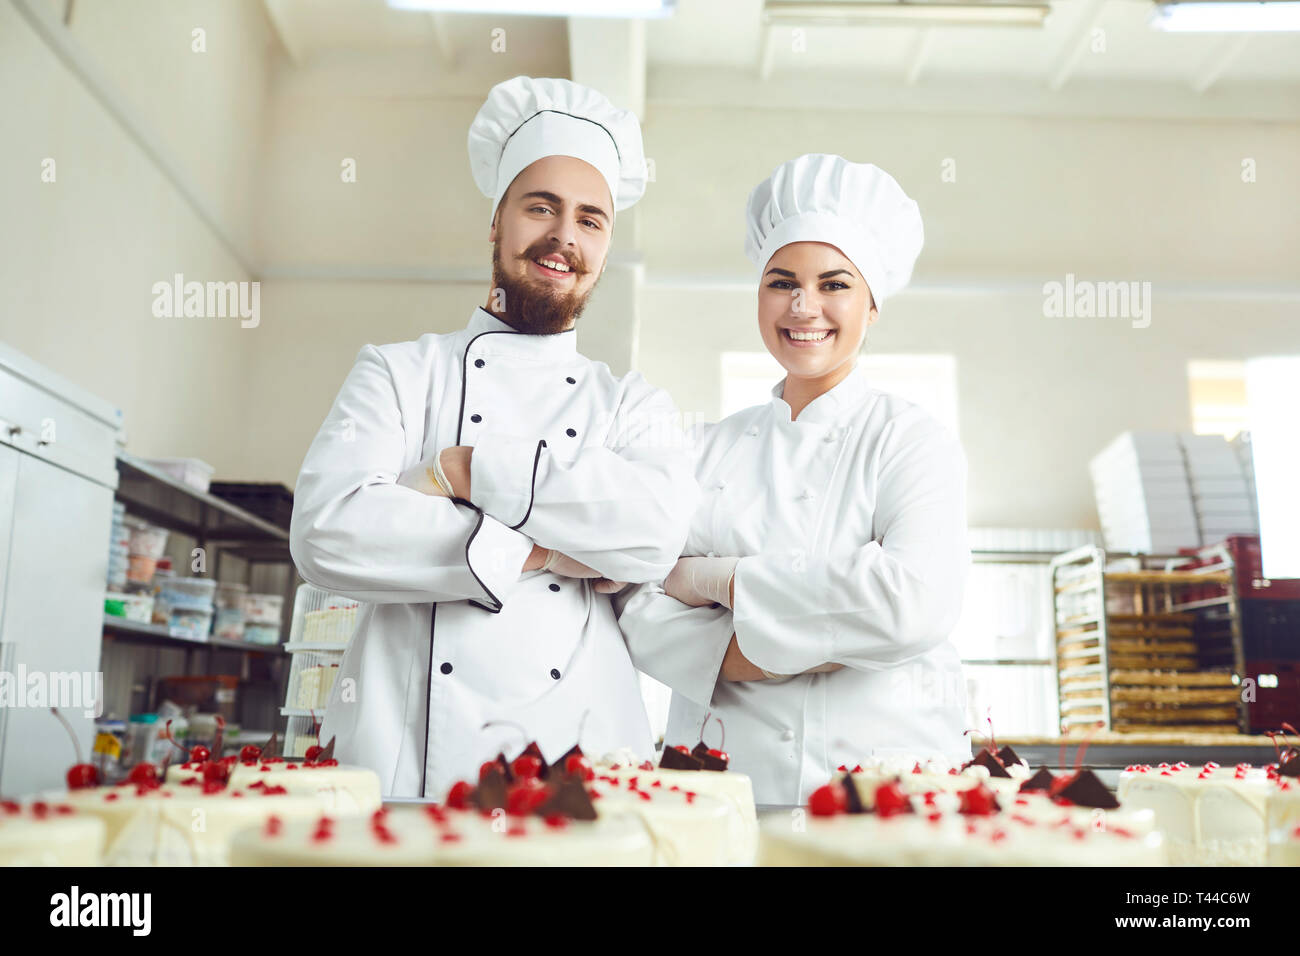 Pastry chefs in white uniform are smiling at bakery. Stock Photo